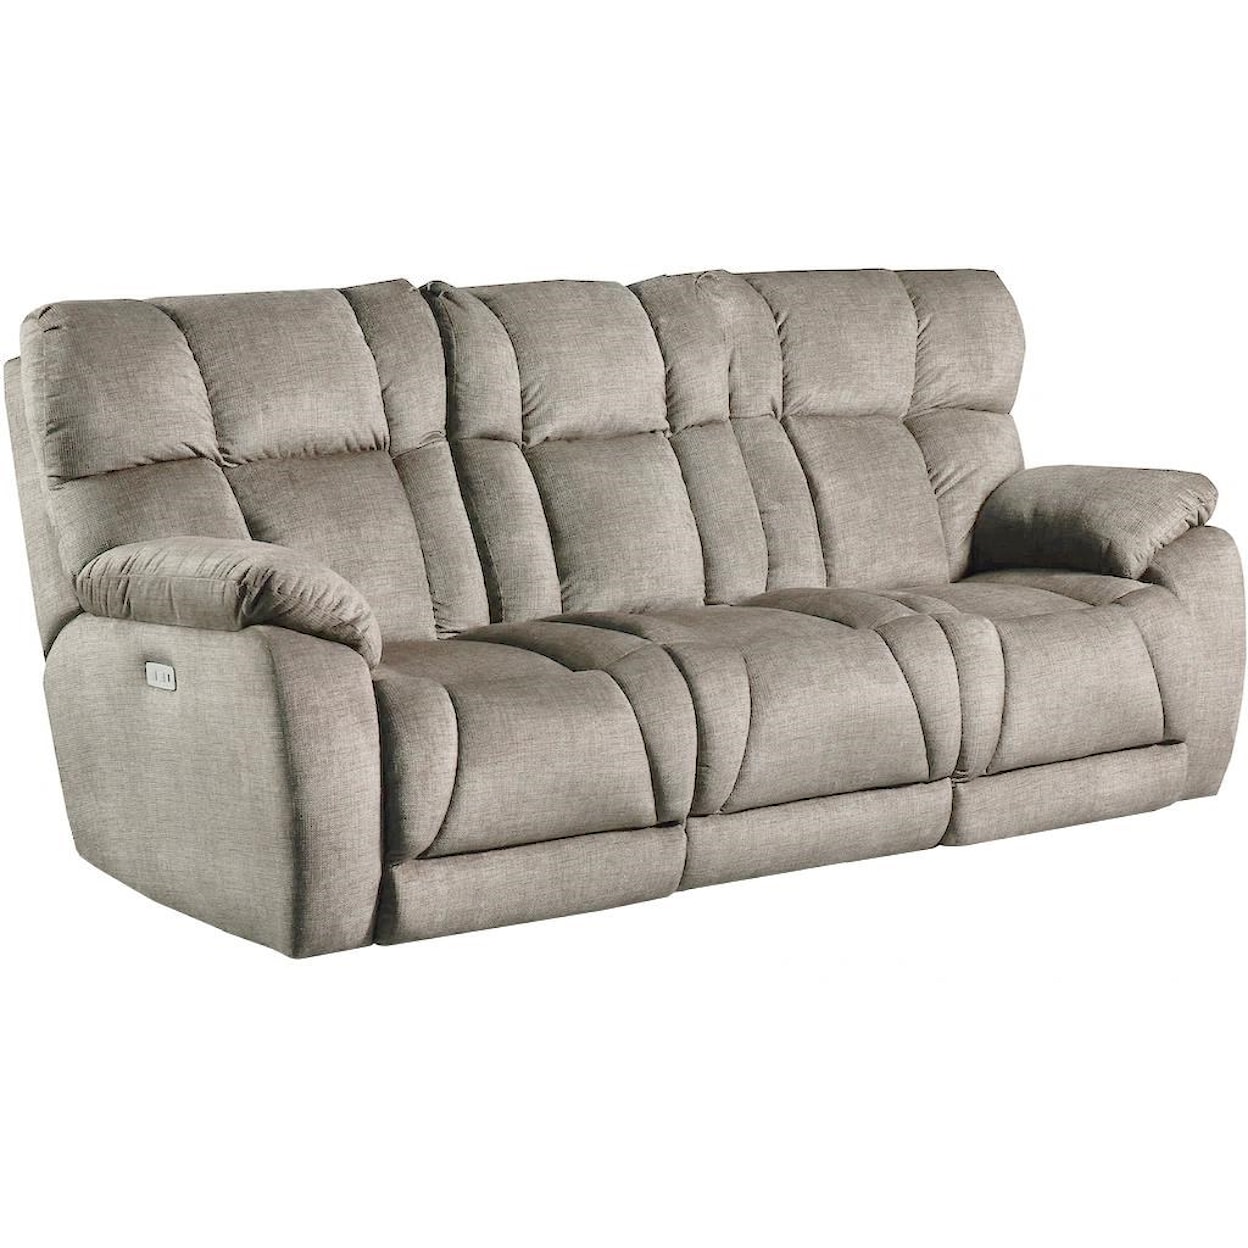 Southern Motion Wild Card Double Reclining Sofa w/ Dropdown Table